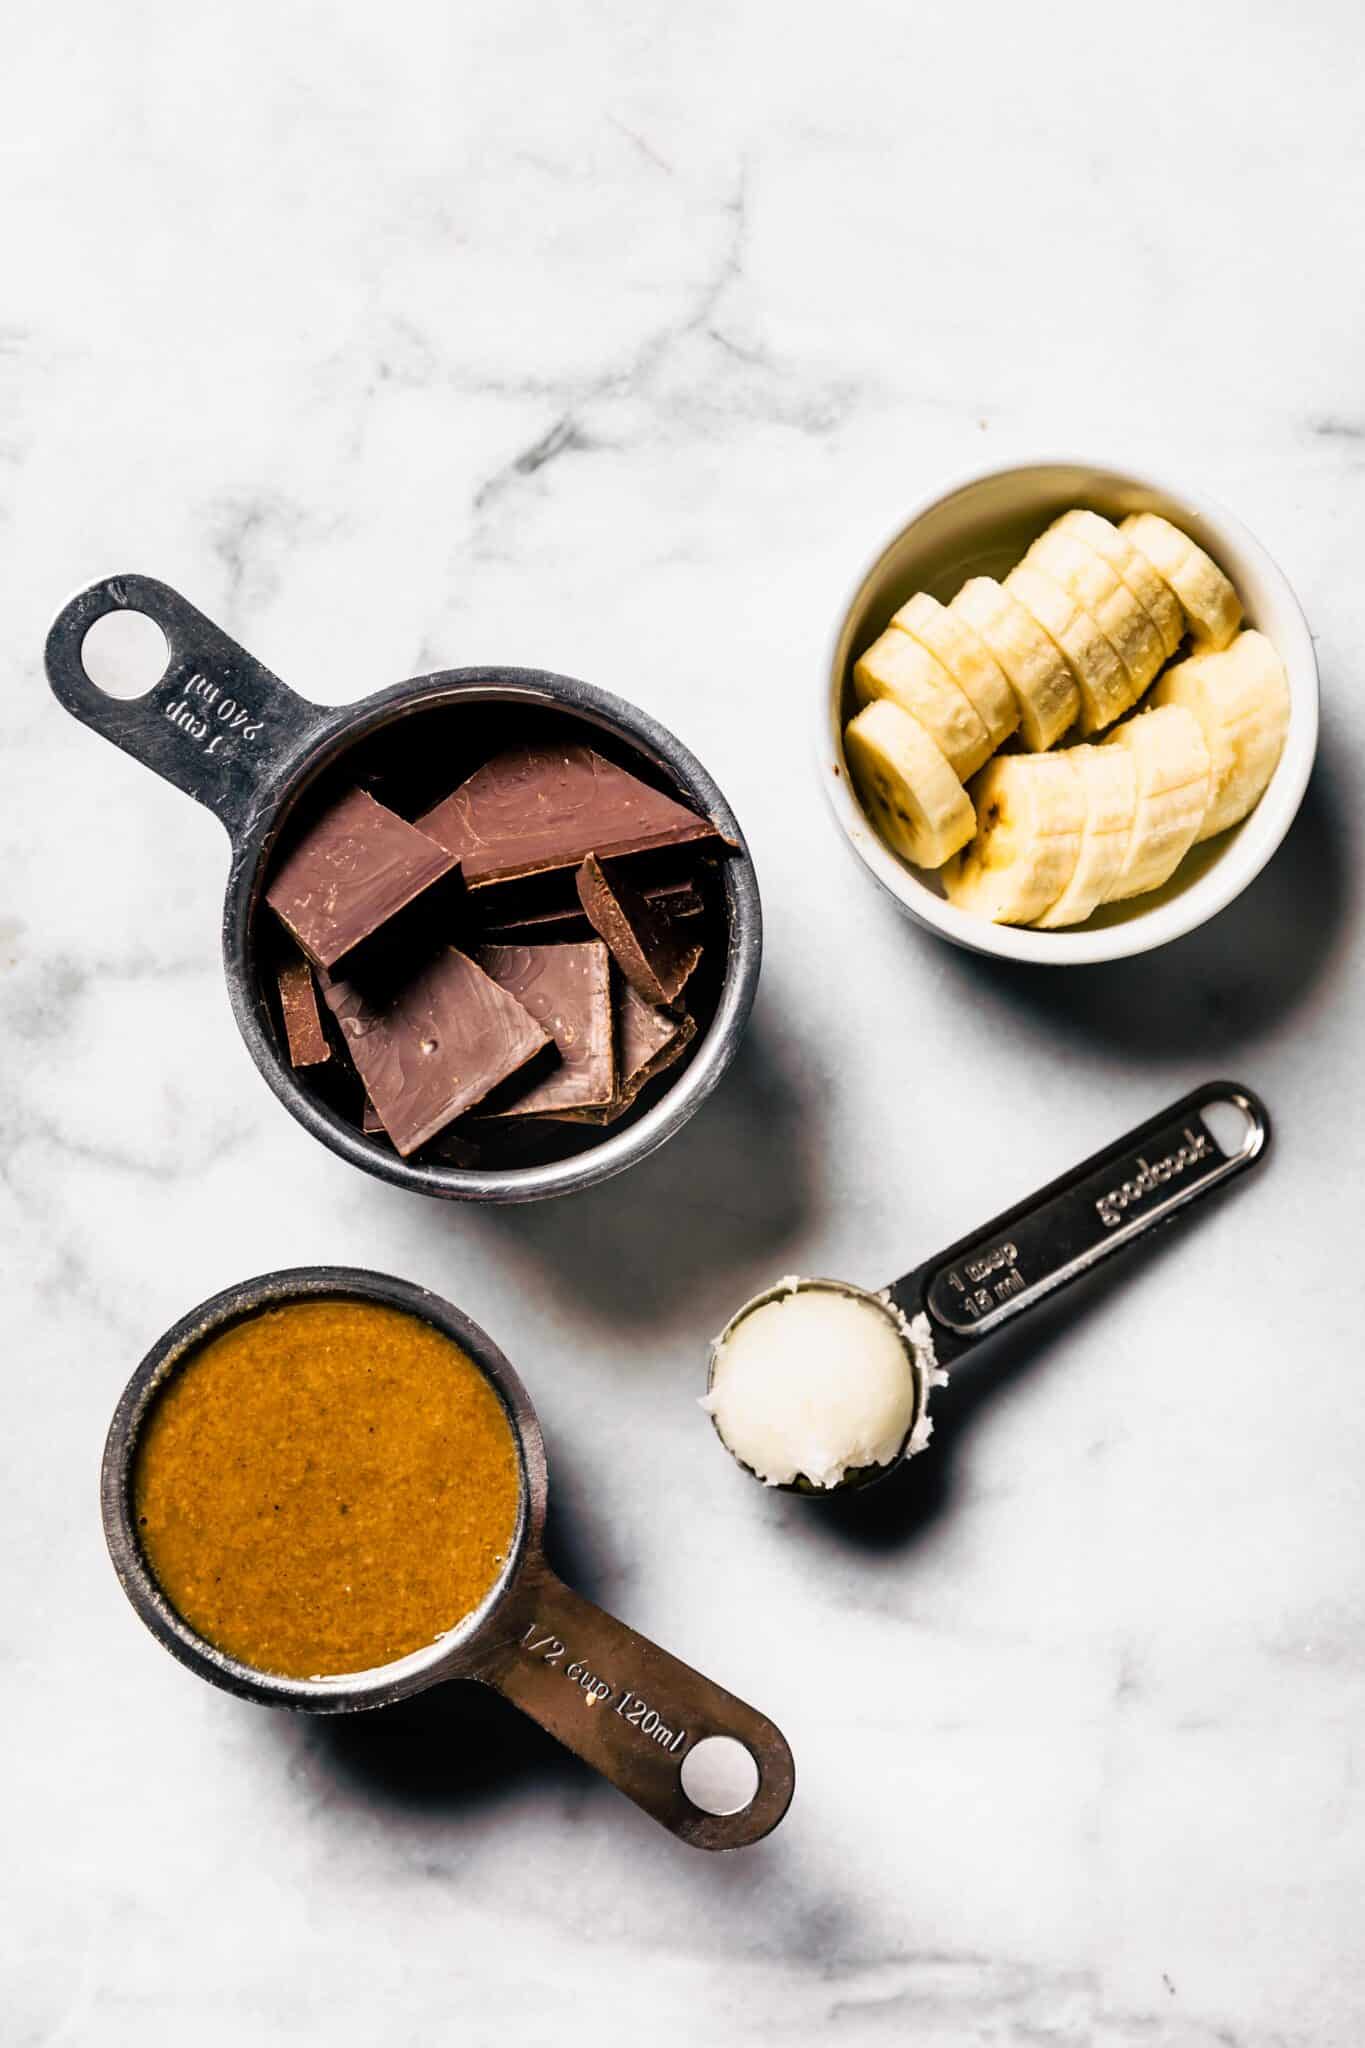 Dark chocolate pieces, banana slices, almond butter and coconut oil in bowls and measuring cups.